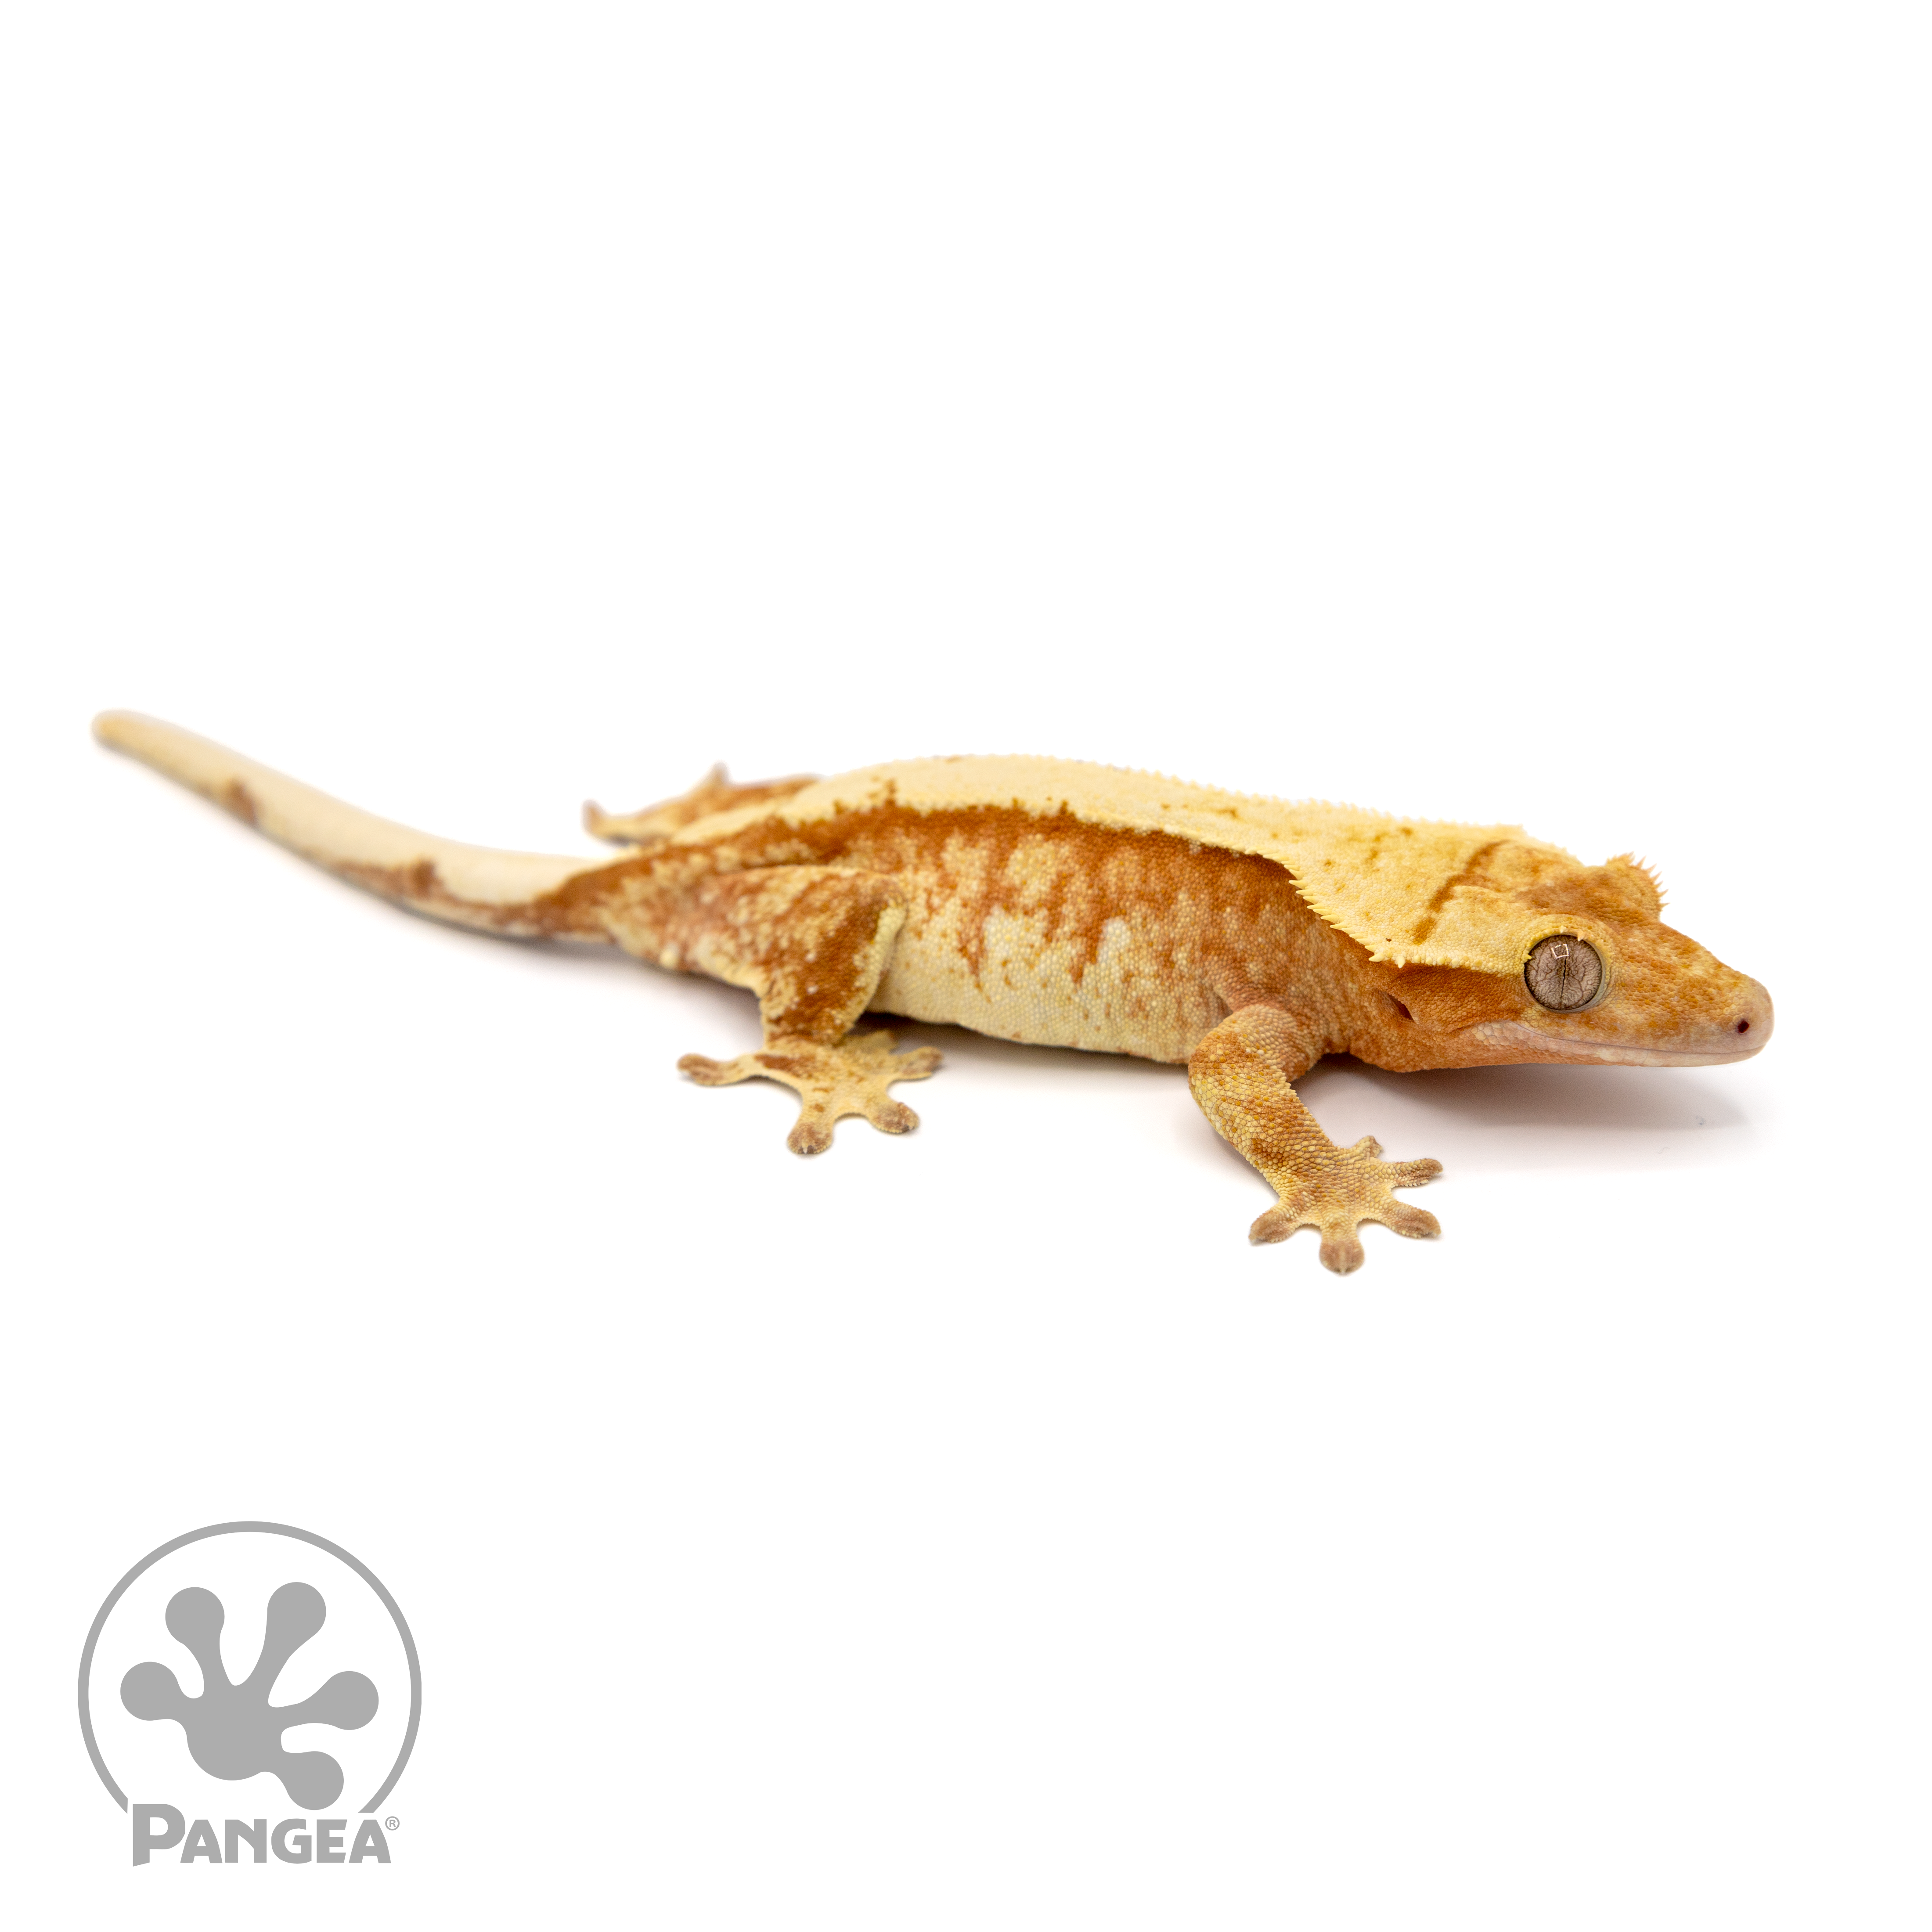 Female Extreme Harlequin Crested Gecko | Pangea Reptile | Cr-1102 - Reptile LLC